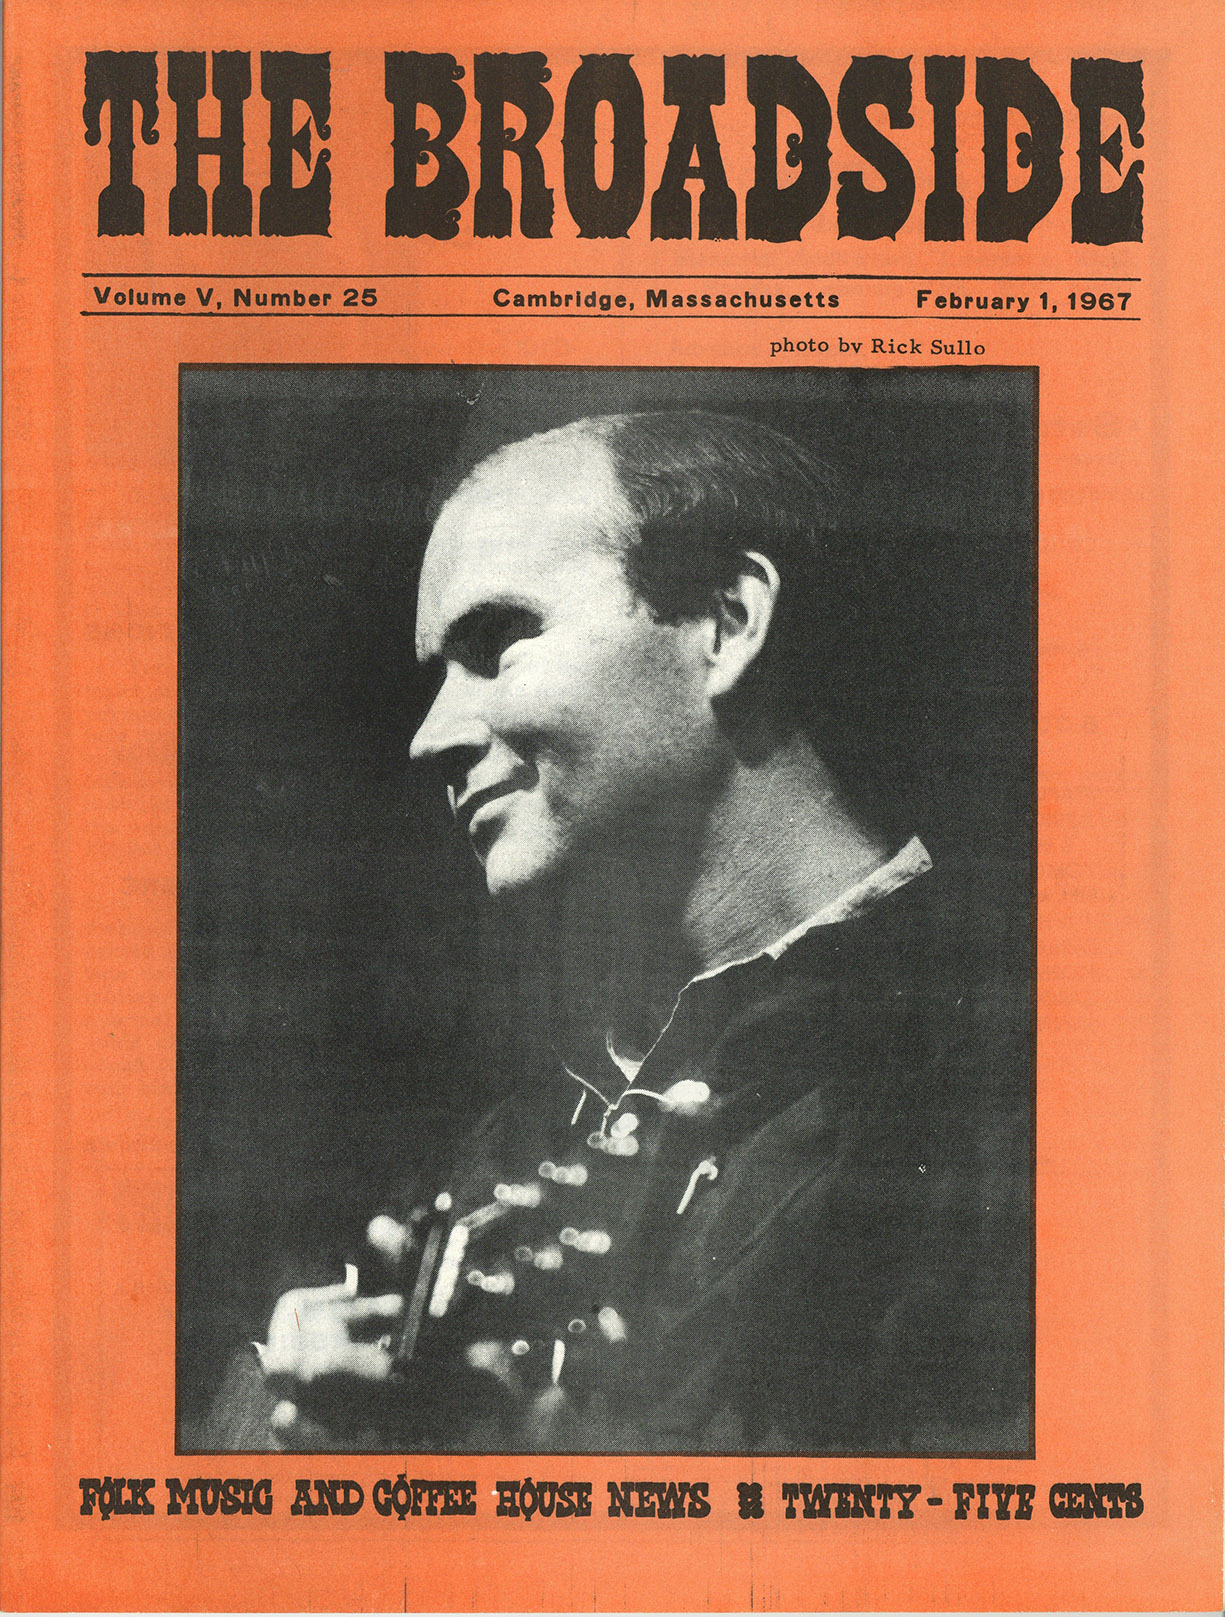 Depiction of Bill Keith on the cover of Broadside, Feb. 1, 1967